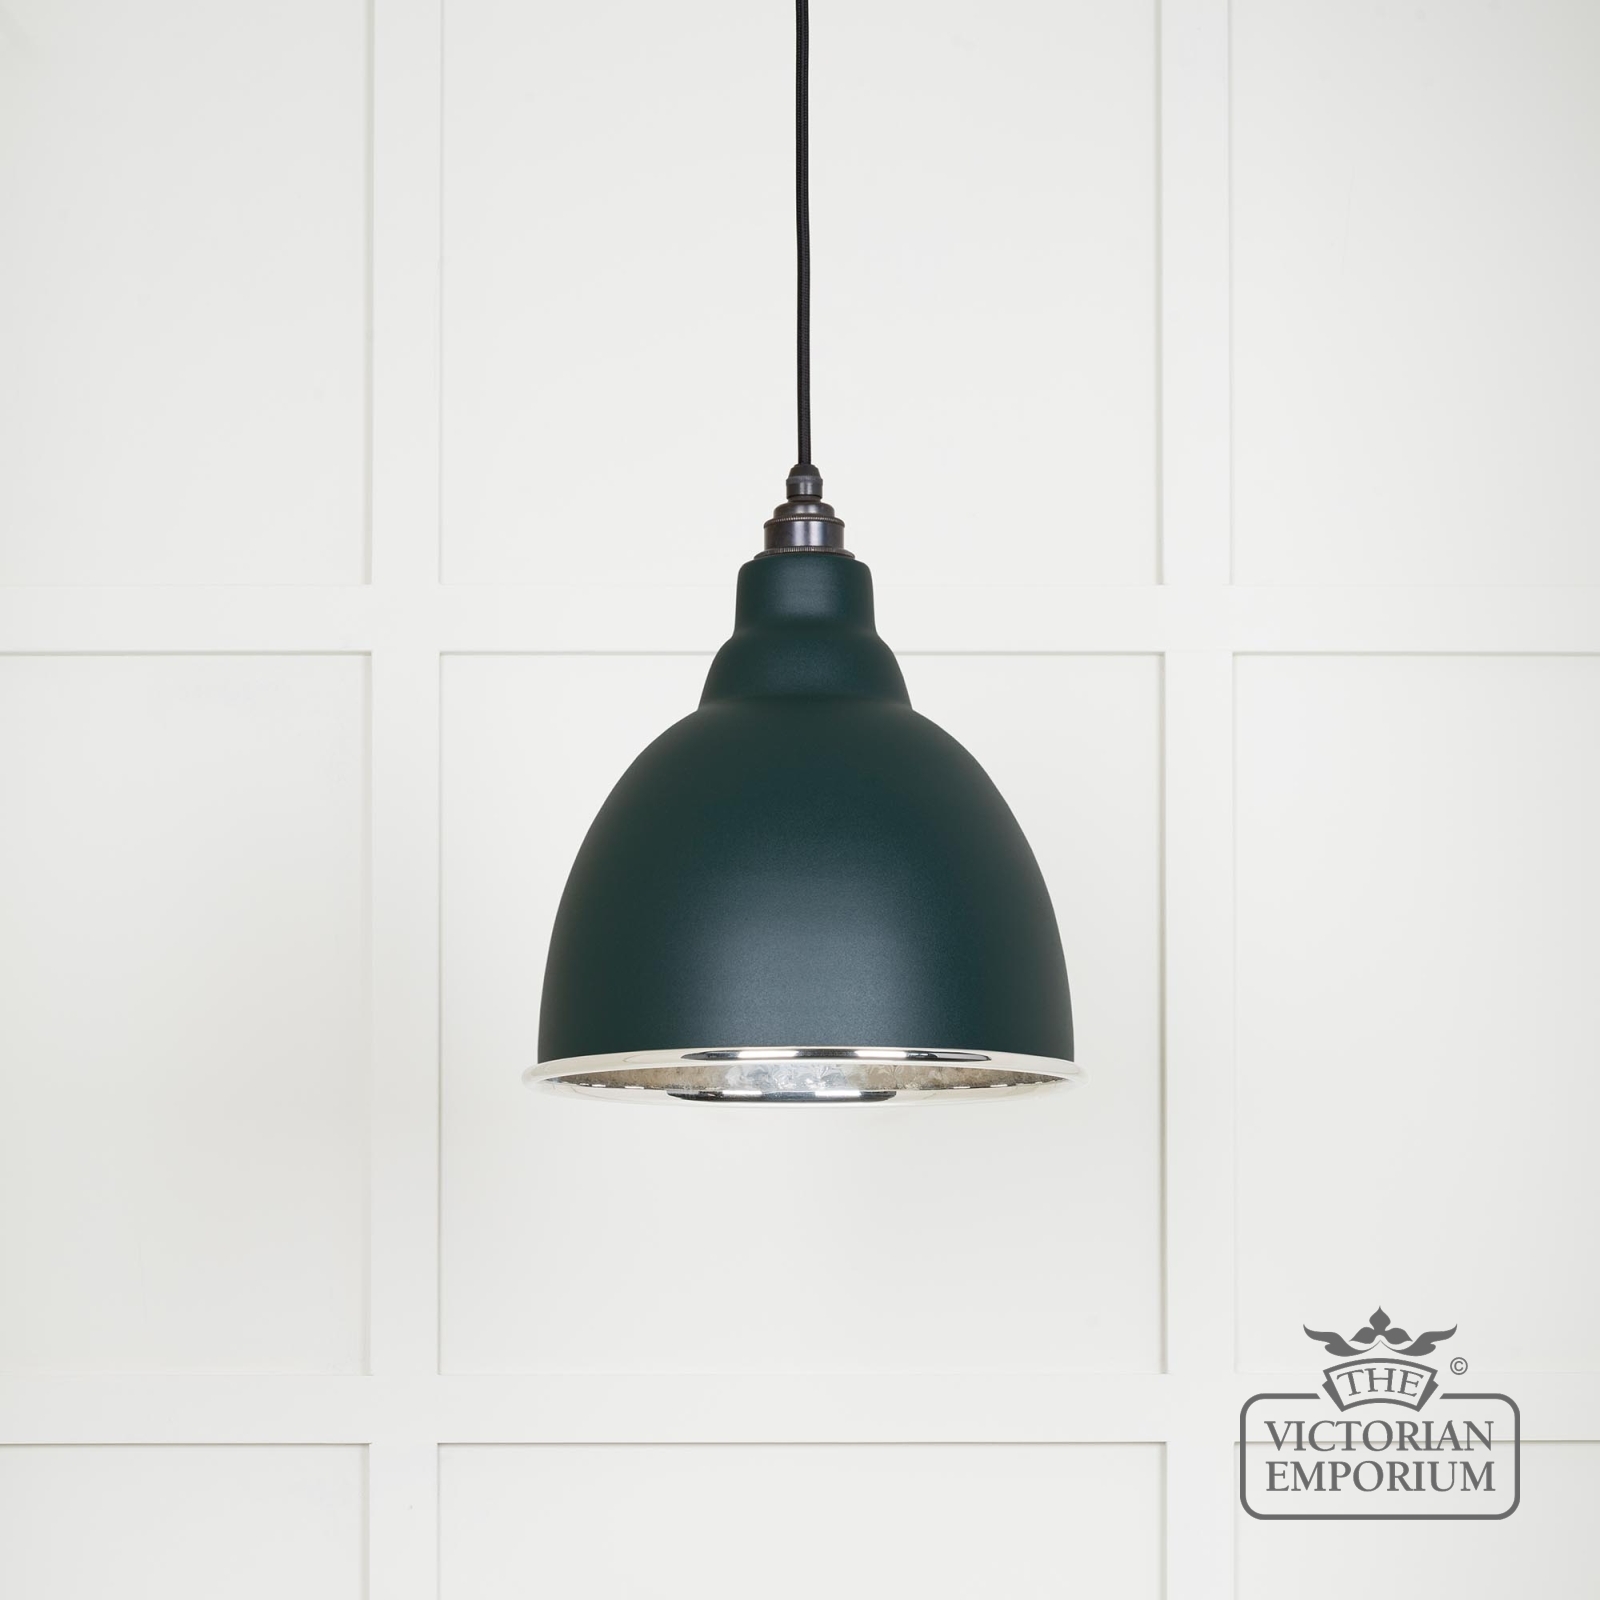 Brindle pendant light in Dingle with hammered nickel interior